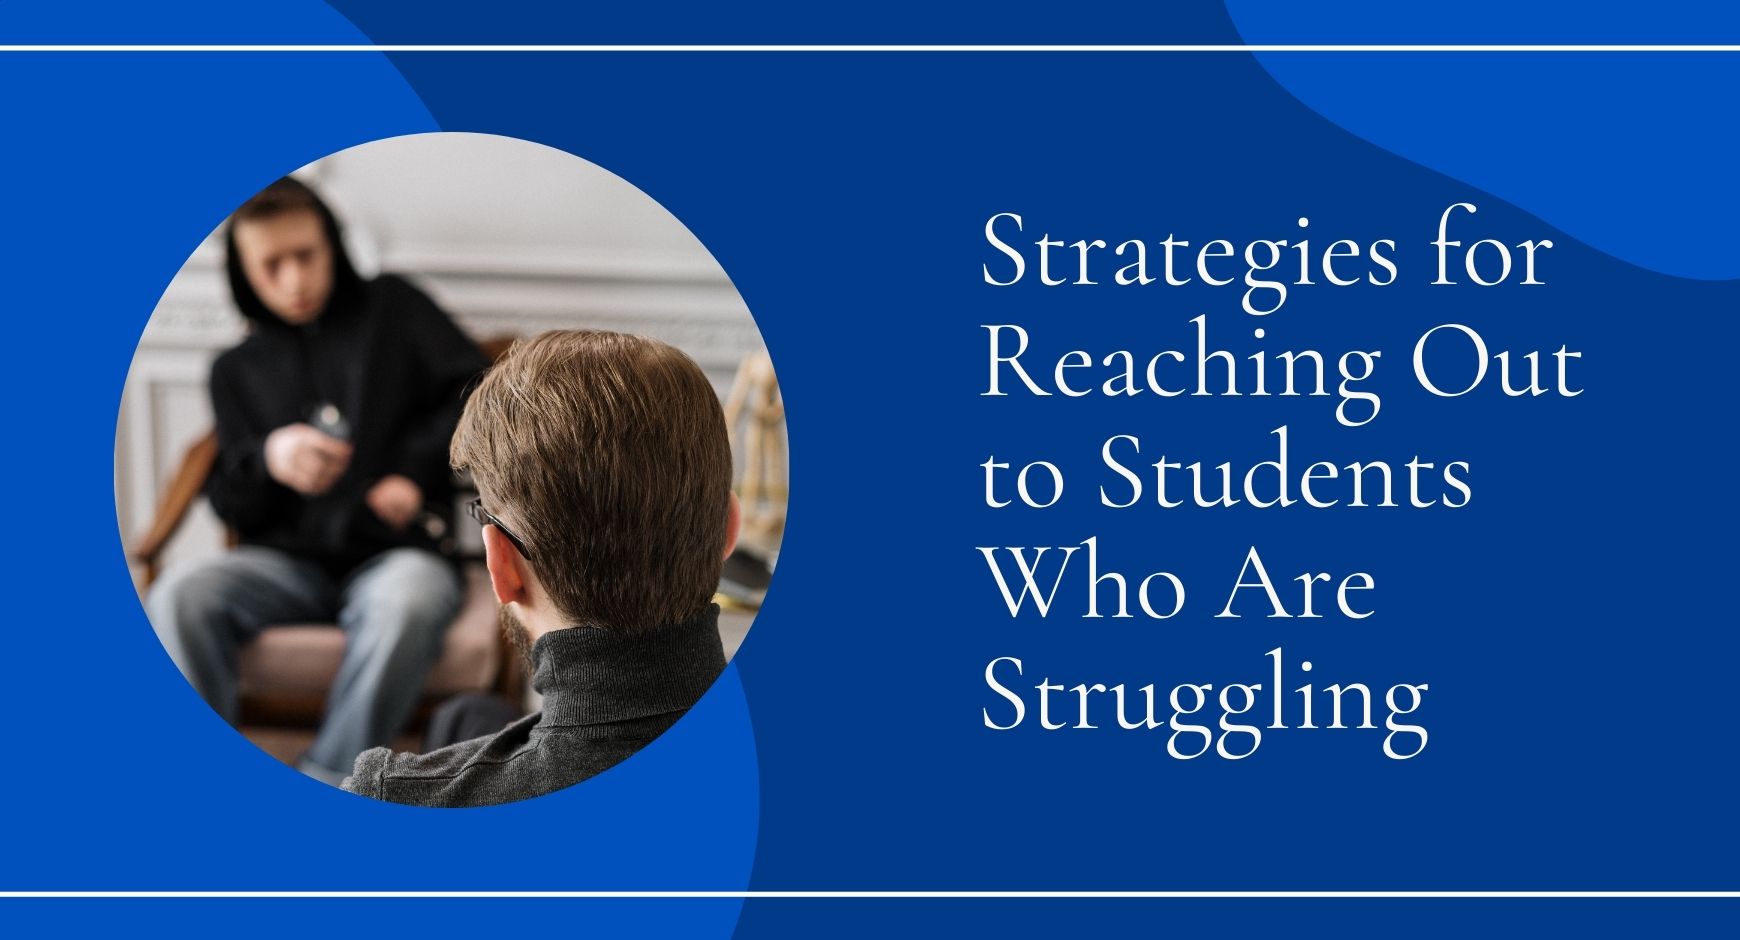 Two men sitting on couches across from each other next to words that read "Strategies for Reaching Out to Students Who Are Struggling"